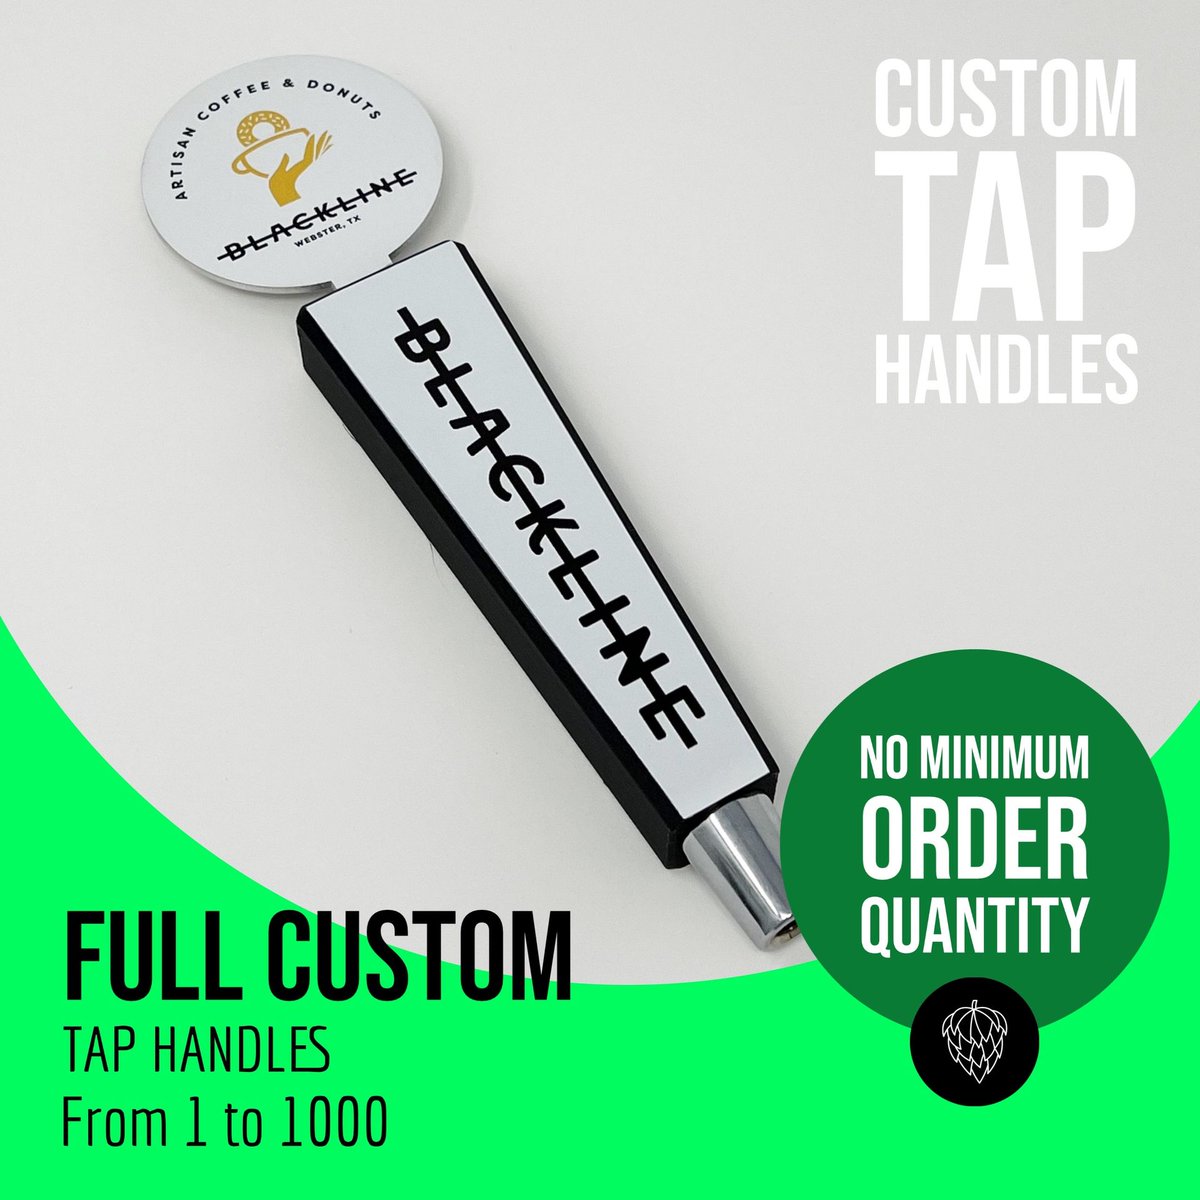 Fully custom tap handles, order 1 or 1000, we want to help bring your dream tap handle to life.

#homebrewing #brewery #craftbeer #coffee #wine